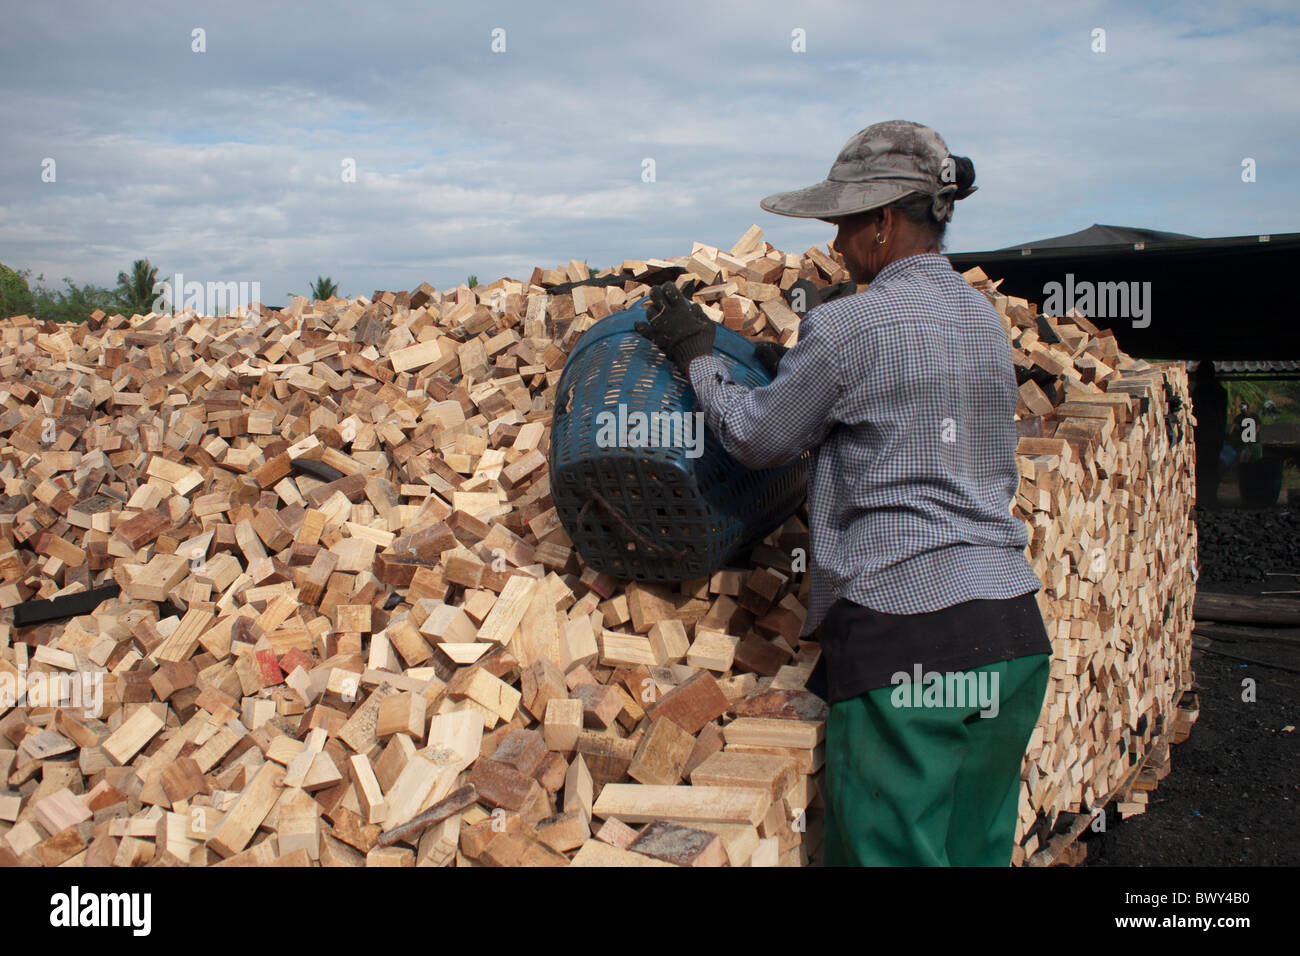 Women is putting the Square Cut wood on the Woodpile to be ready to make the wood charcoal Stock Photo